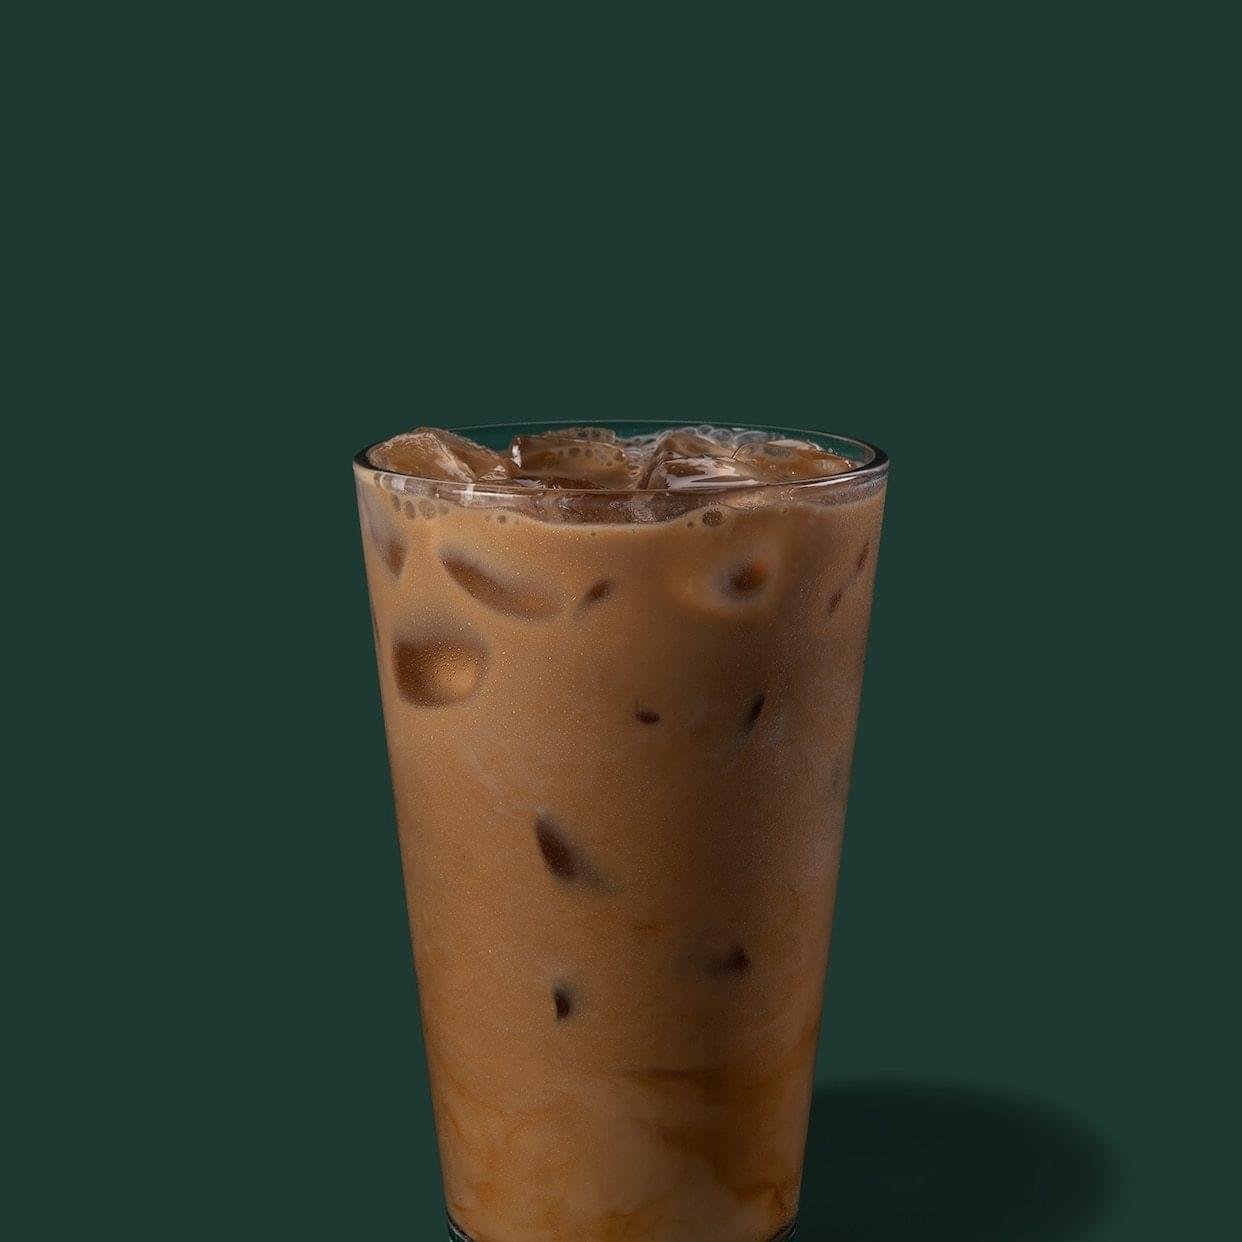 Starbucks Tall Iced Flat White Nutrition Facts